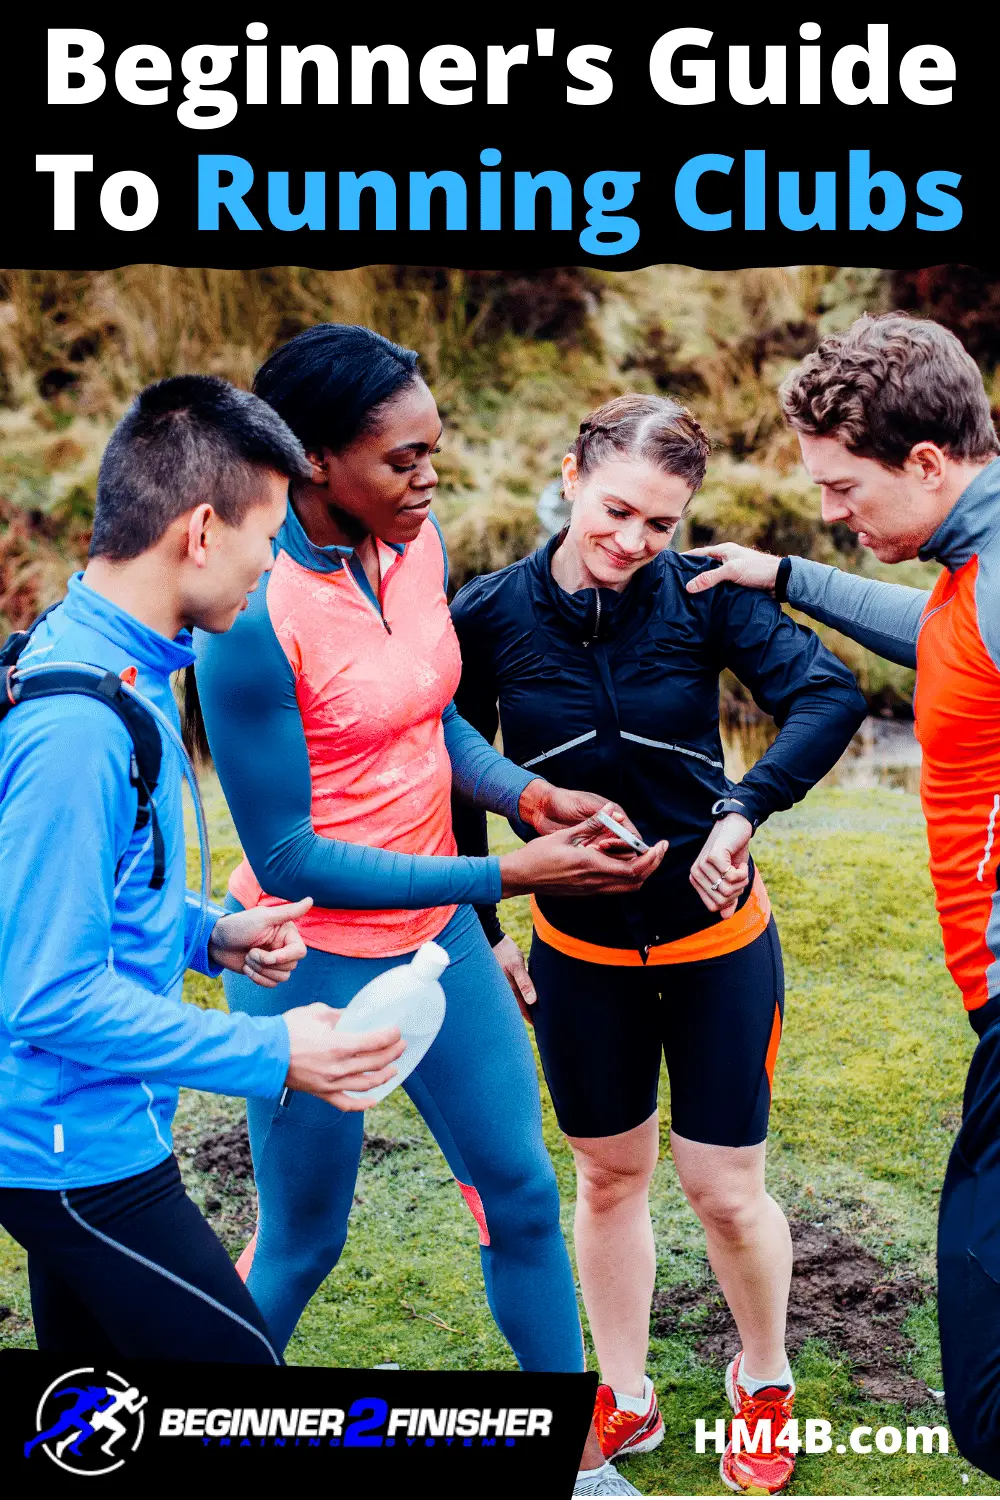 What is a running club? How can it benefit my running?